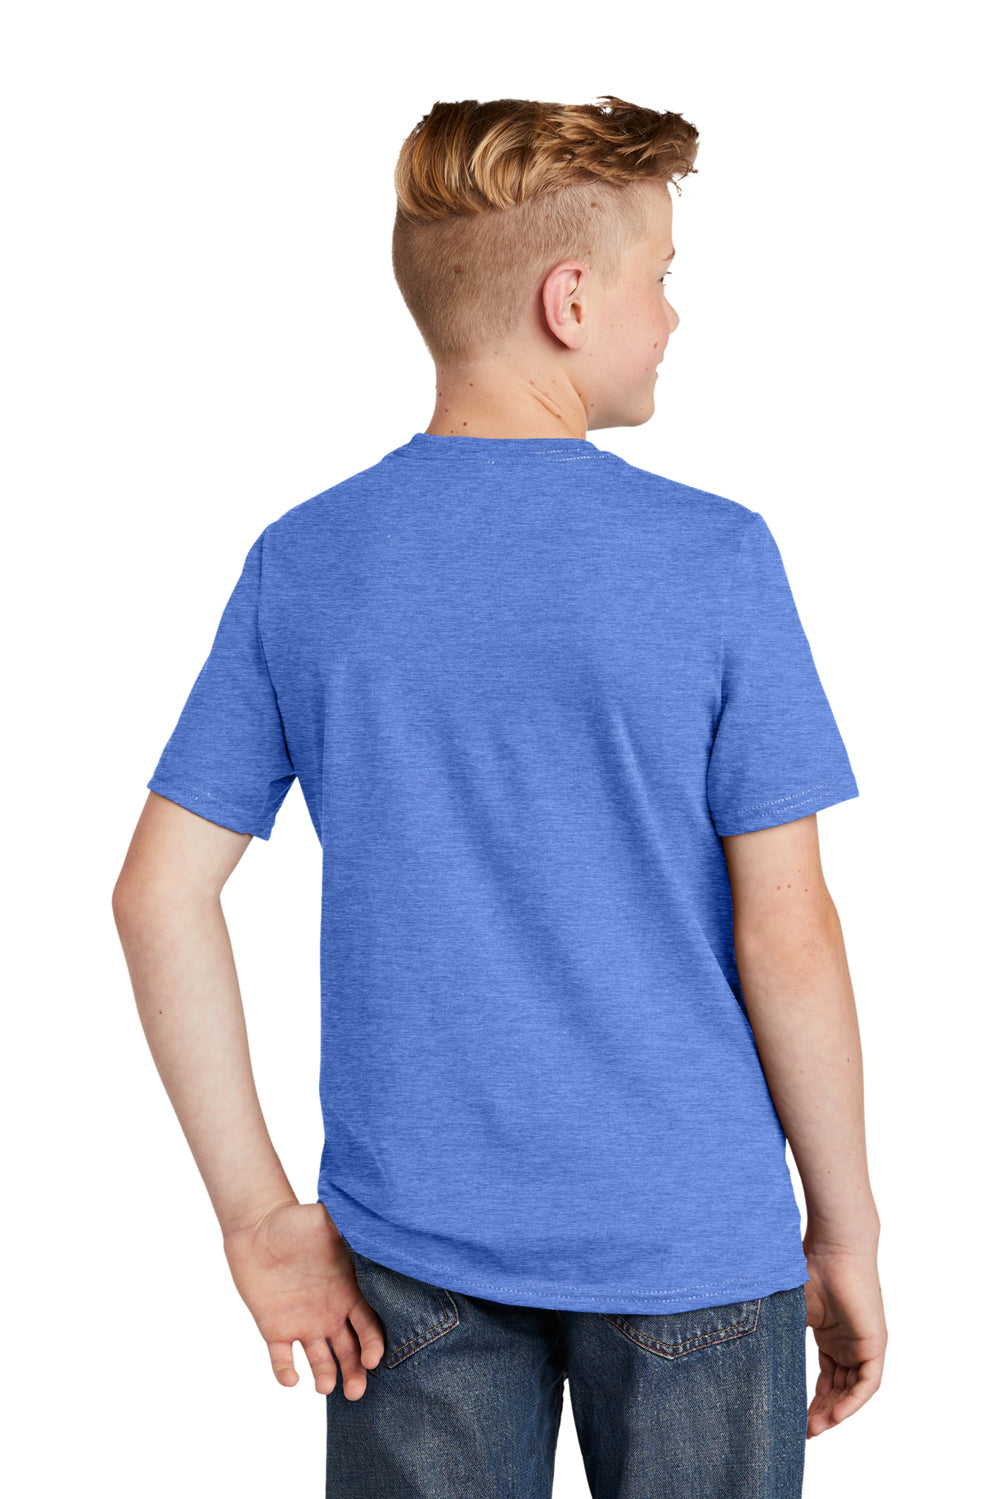 District DT6000Y Youth Very Important Short Sleeve Crewneck T-Shirt Heather Royal Blue Back